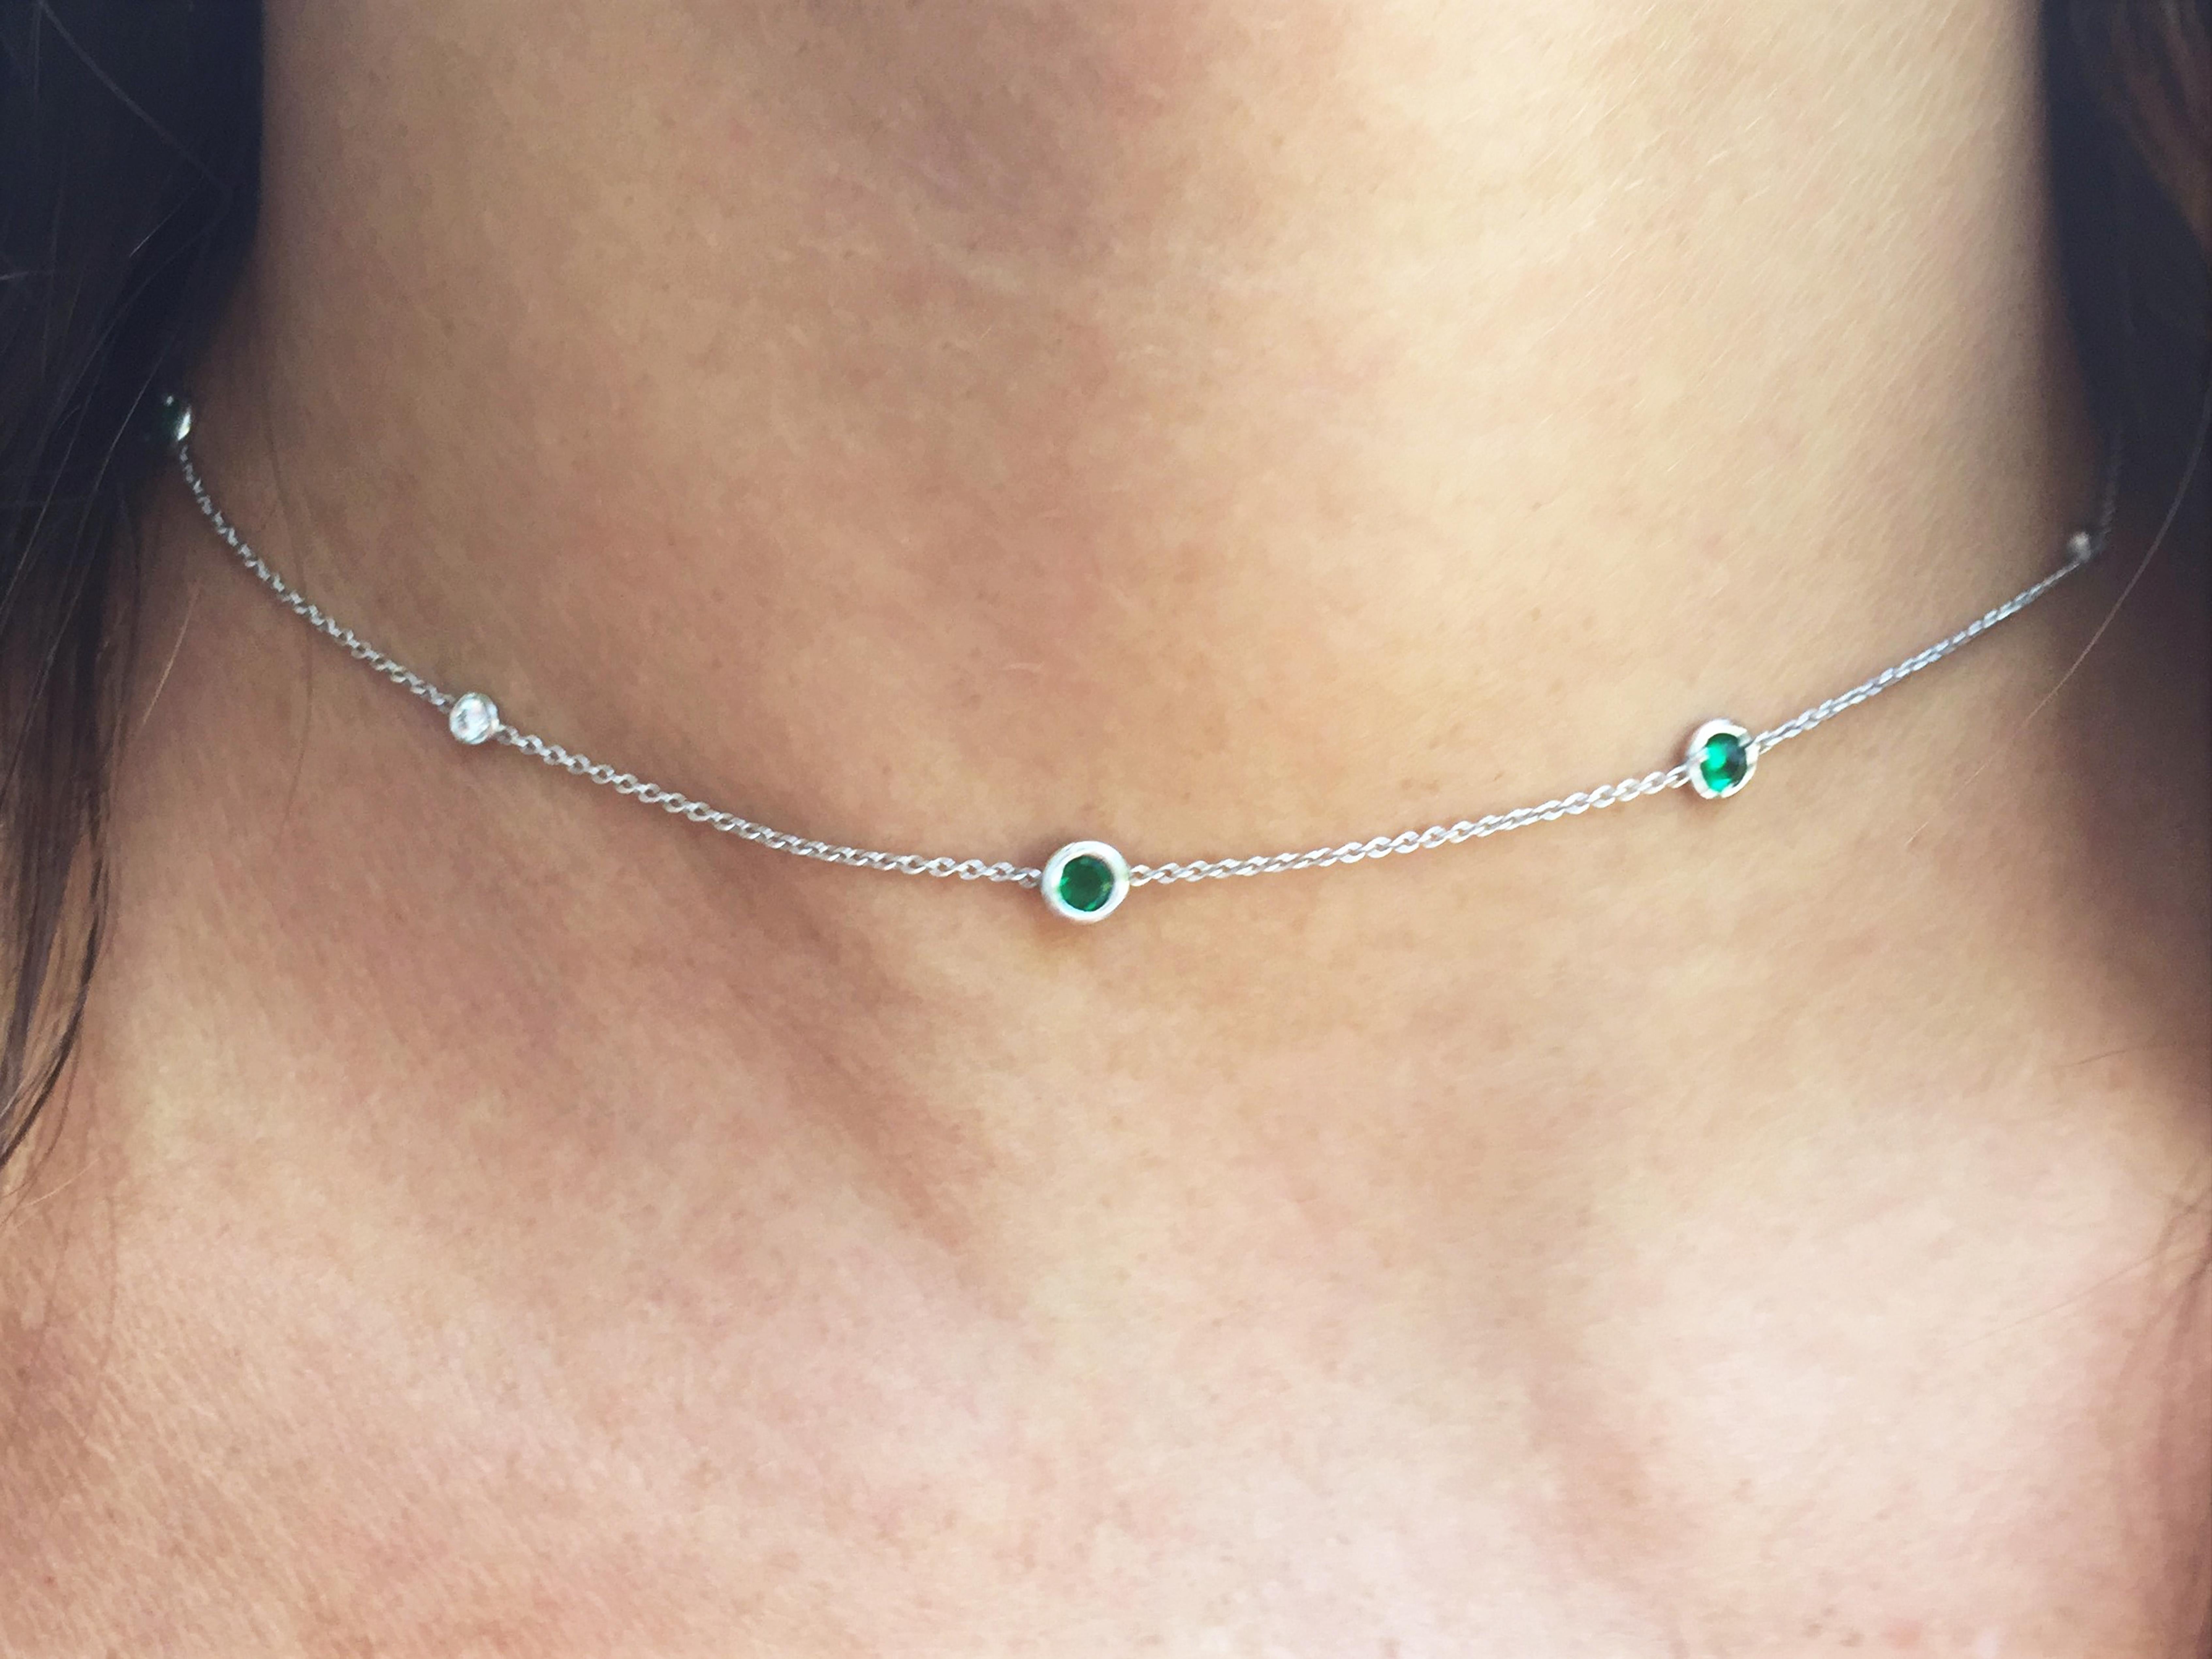 Contemporary White Gold Pendant Necklace with Five-Bezel Set Emerald and Diamond